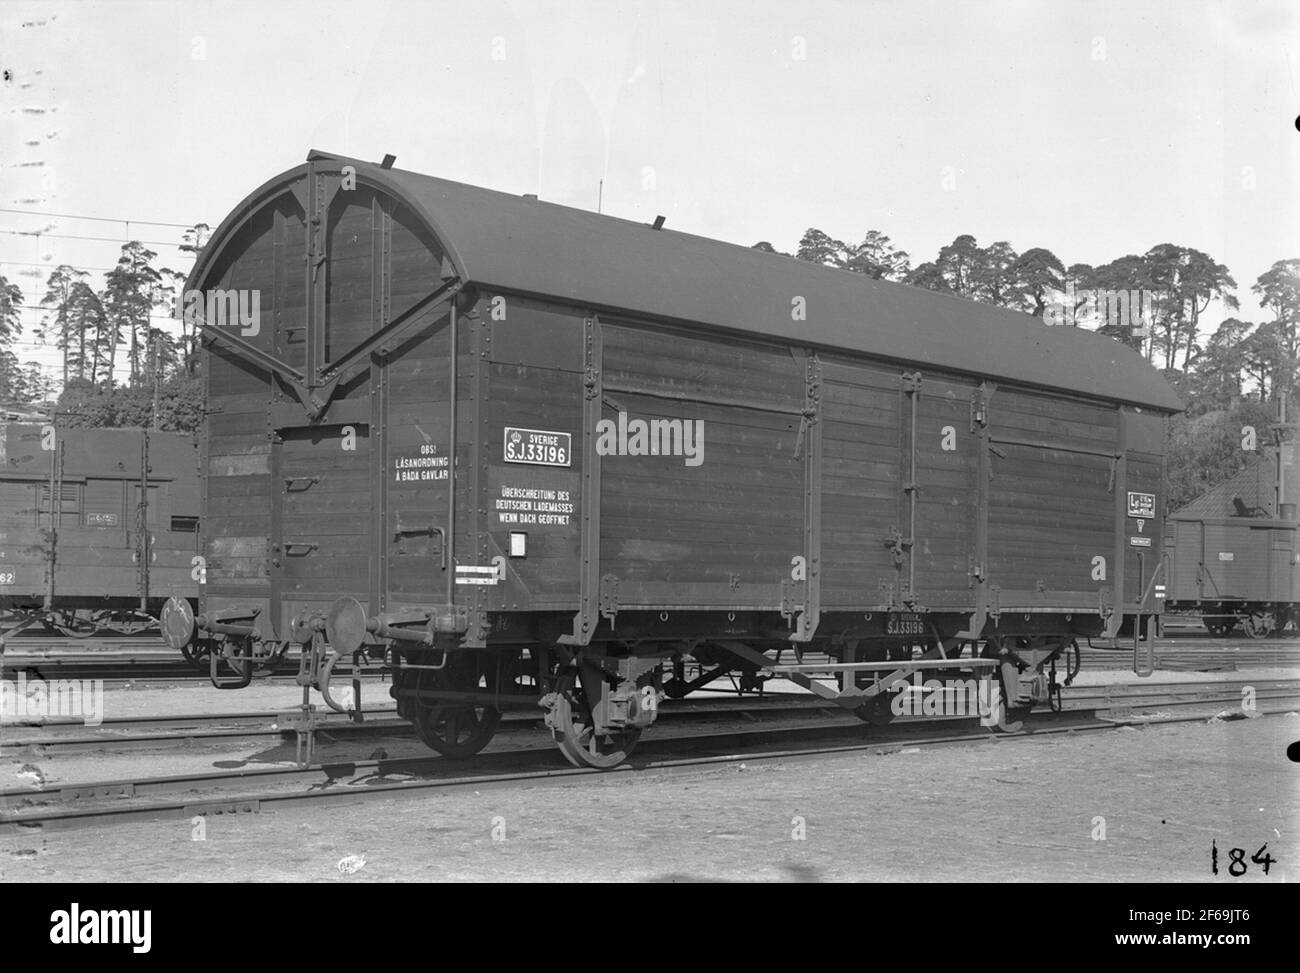 State Railways, SJ LGT 33196. Warning text in German. Was provided with roofs in 1927. Stock Photo